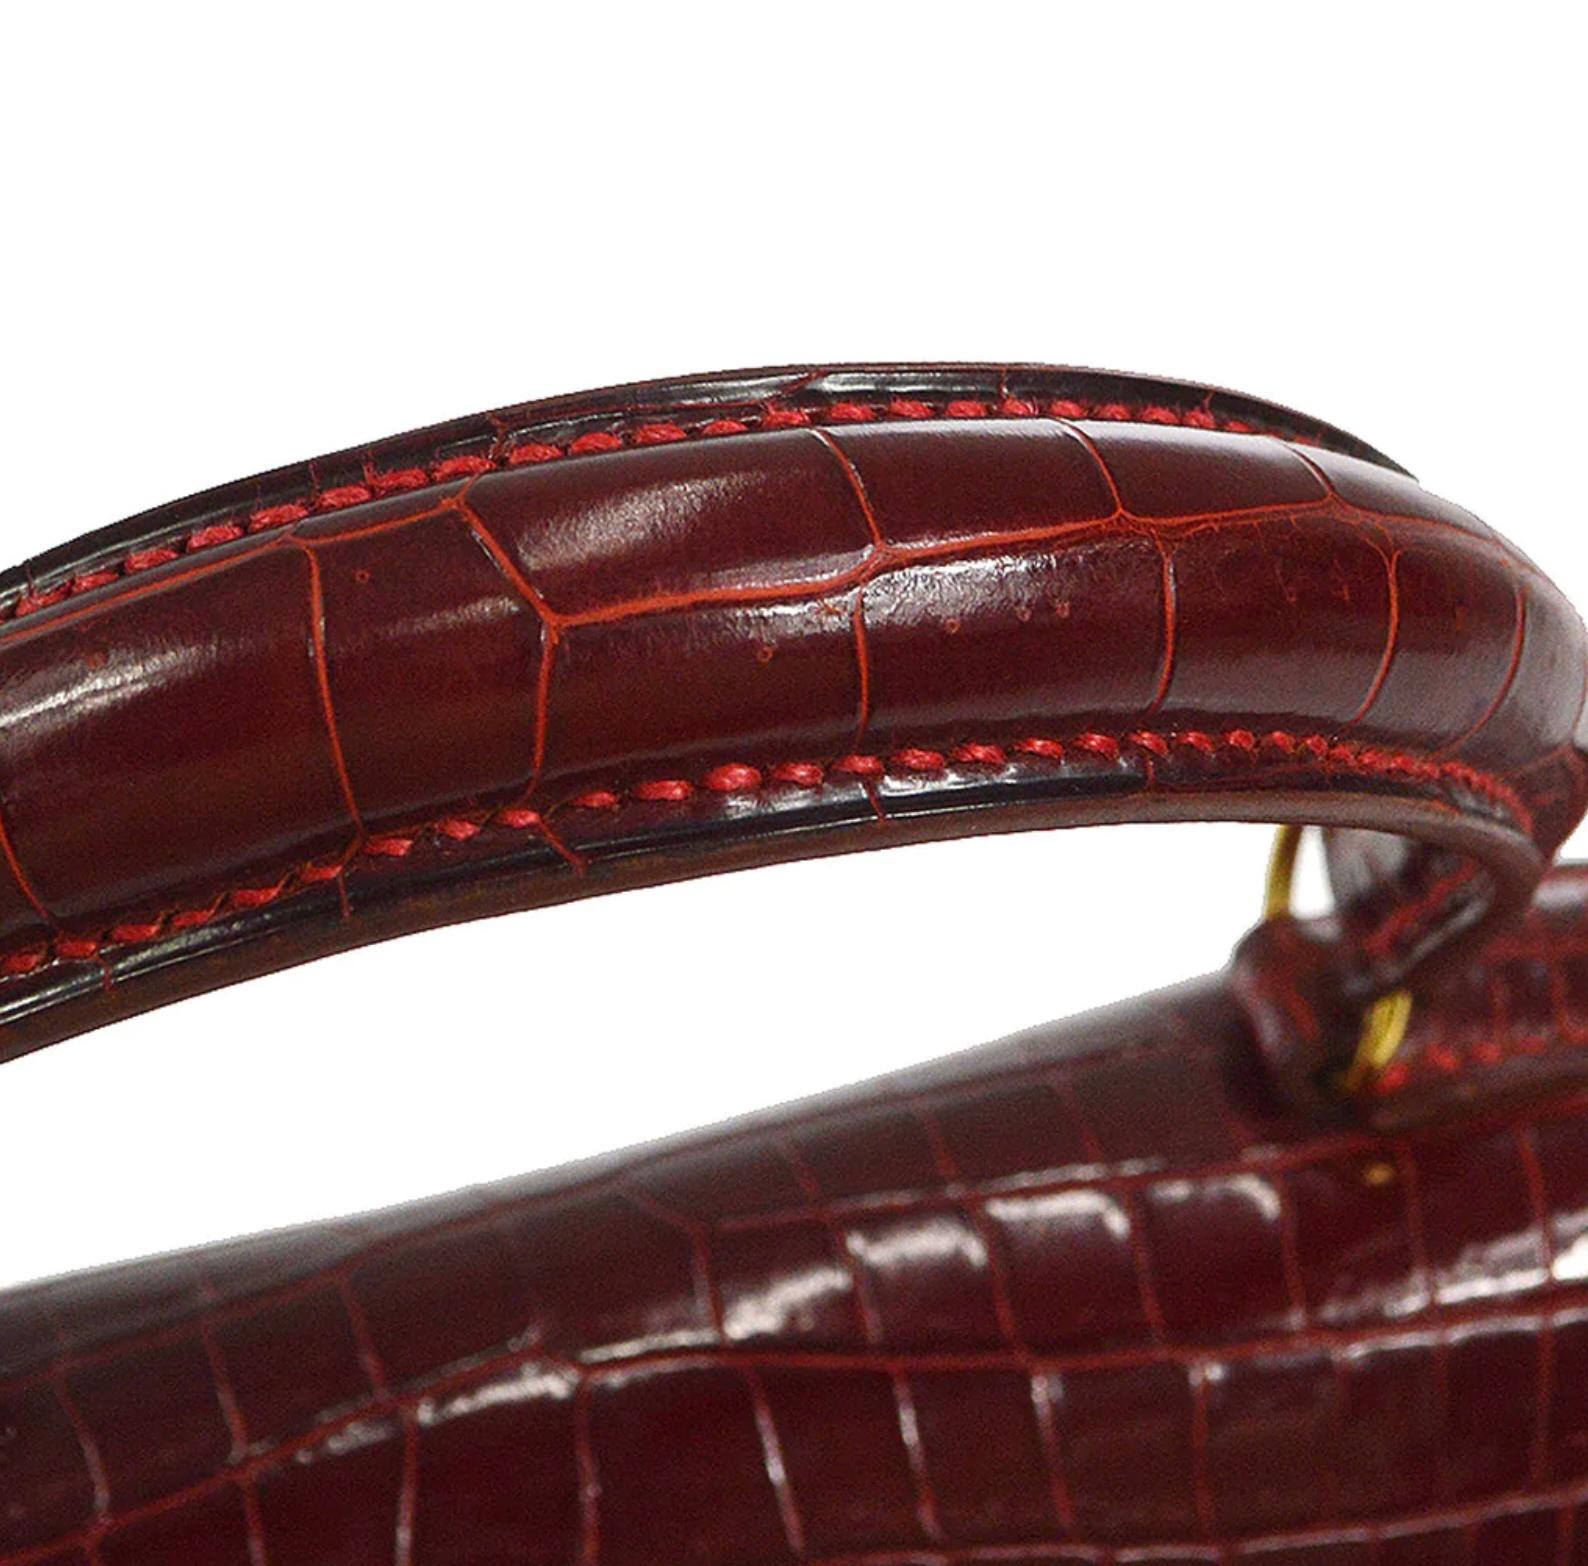 Pre-Owned Vintage Condition
From 1998 Collection
Rouge
Porosus Crocodile
Gold Tone Hardware
Measures W 12.5